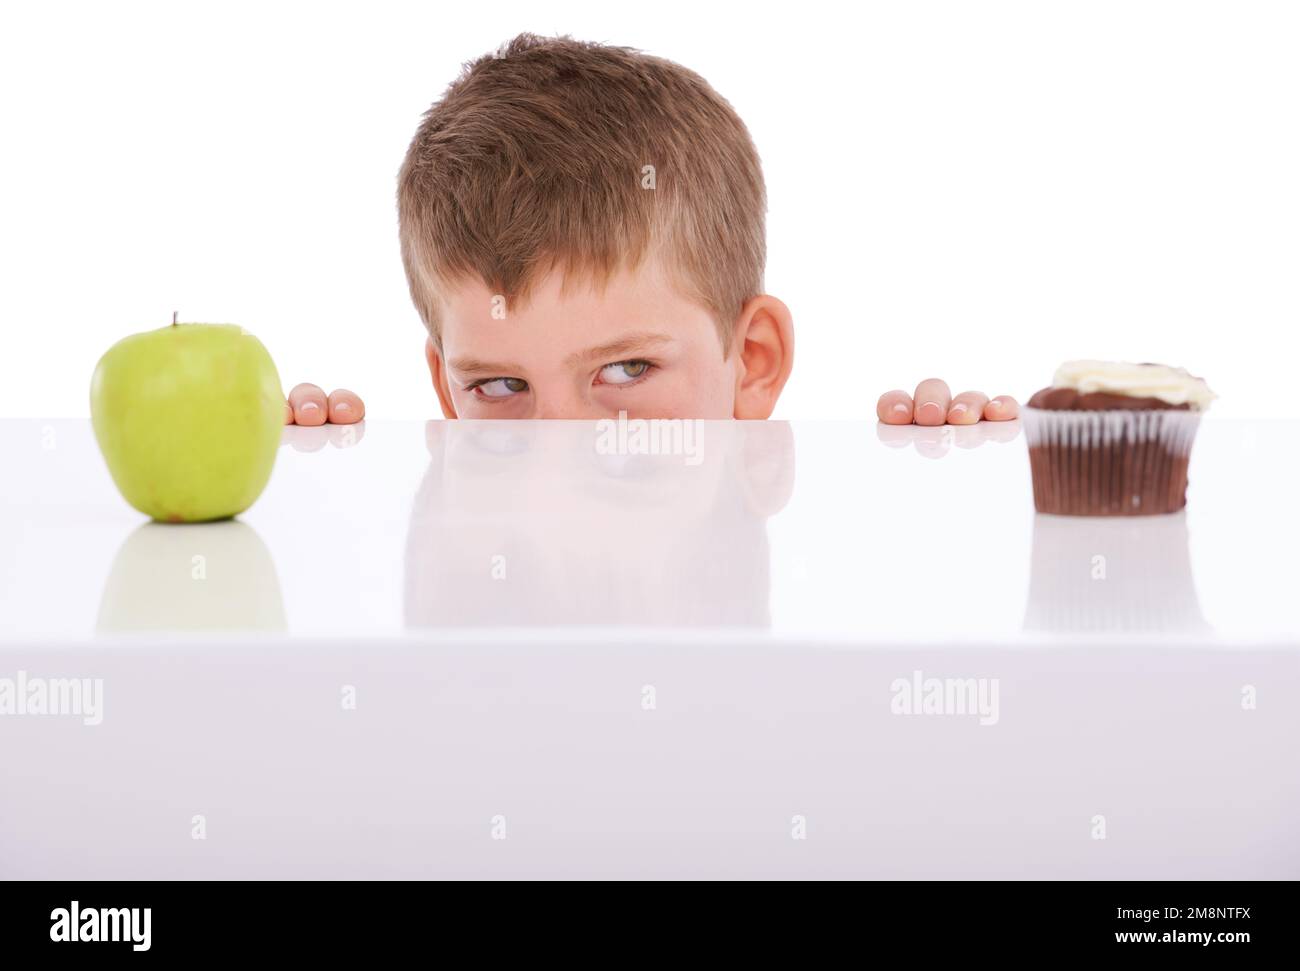 Apple, cake and choice with a boy deciding between sweets or health in studio on a white background. Food, fruit and decision with a male child Stock Photo